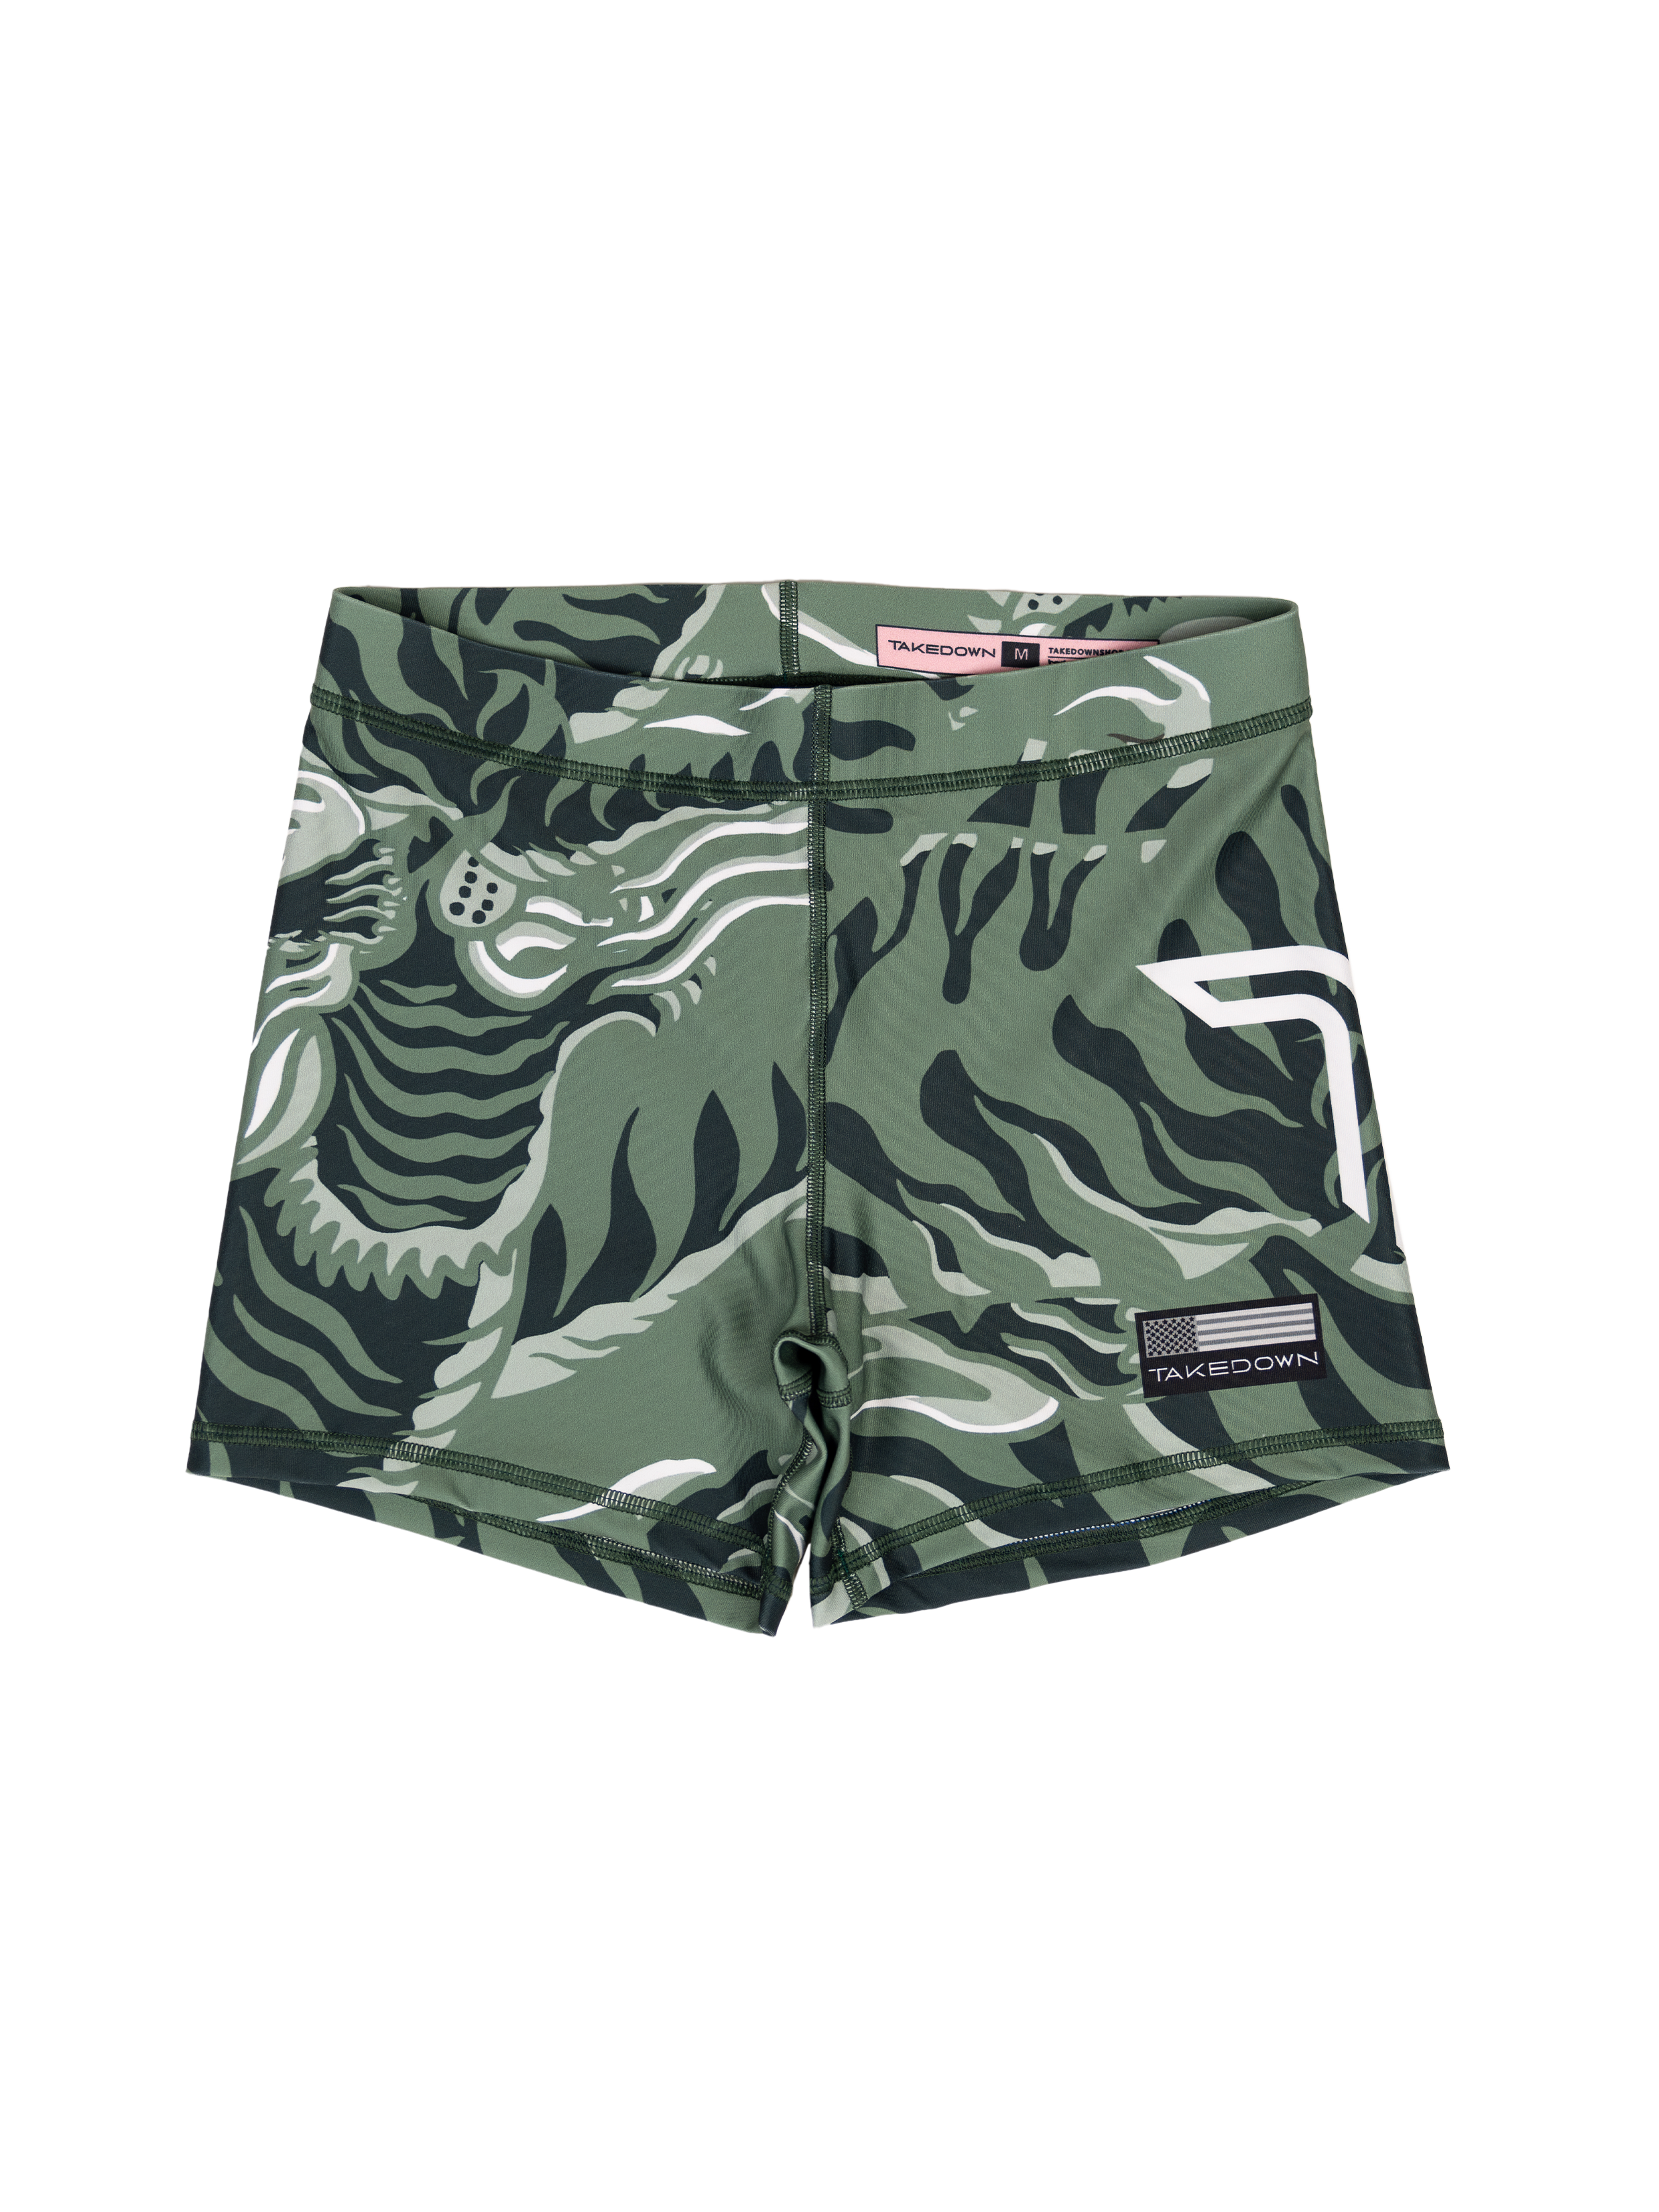 'Tiger Fight' Women's Compression Shorts - Moss Green (4